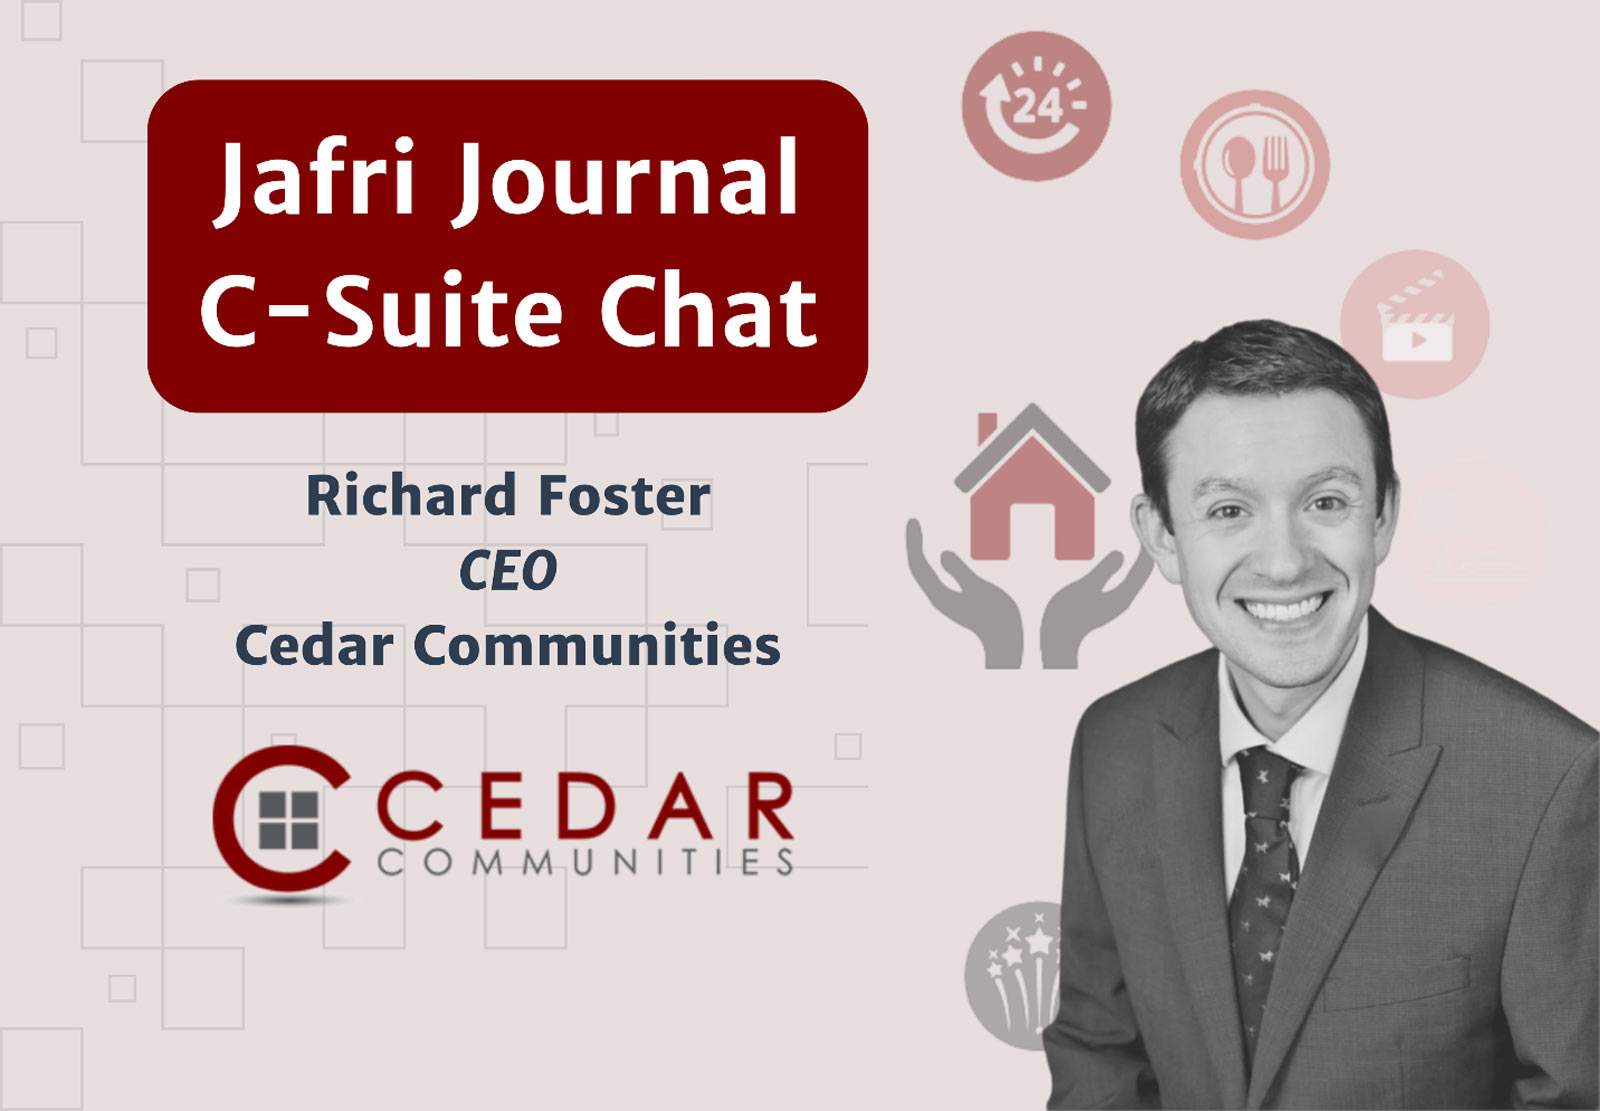 Jafri Journal C-Suite Chat with Richard Foster